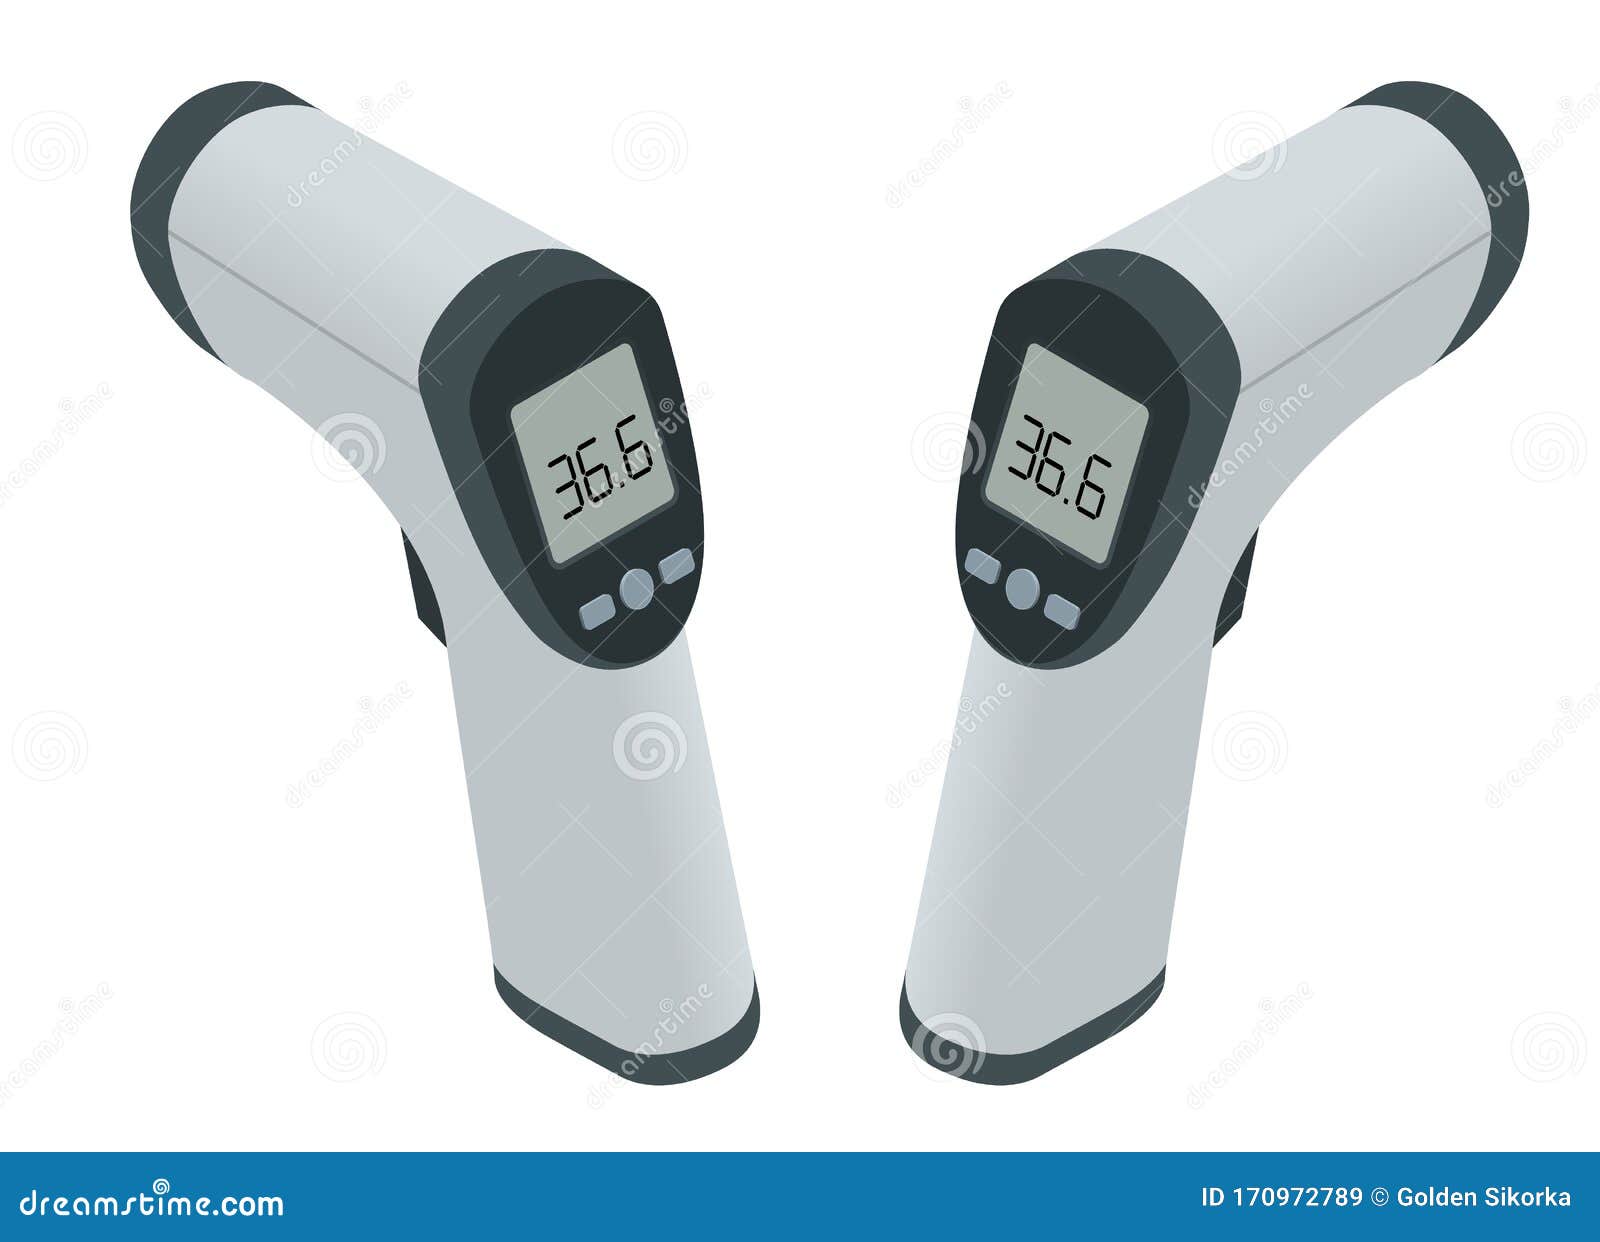 https://thumbs.dreamstime.com/z/isometric-medical-digital-non-contact-infrared-thermometer-measures-ambient-body-temperature-colored-170972789.jpg